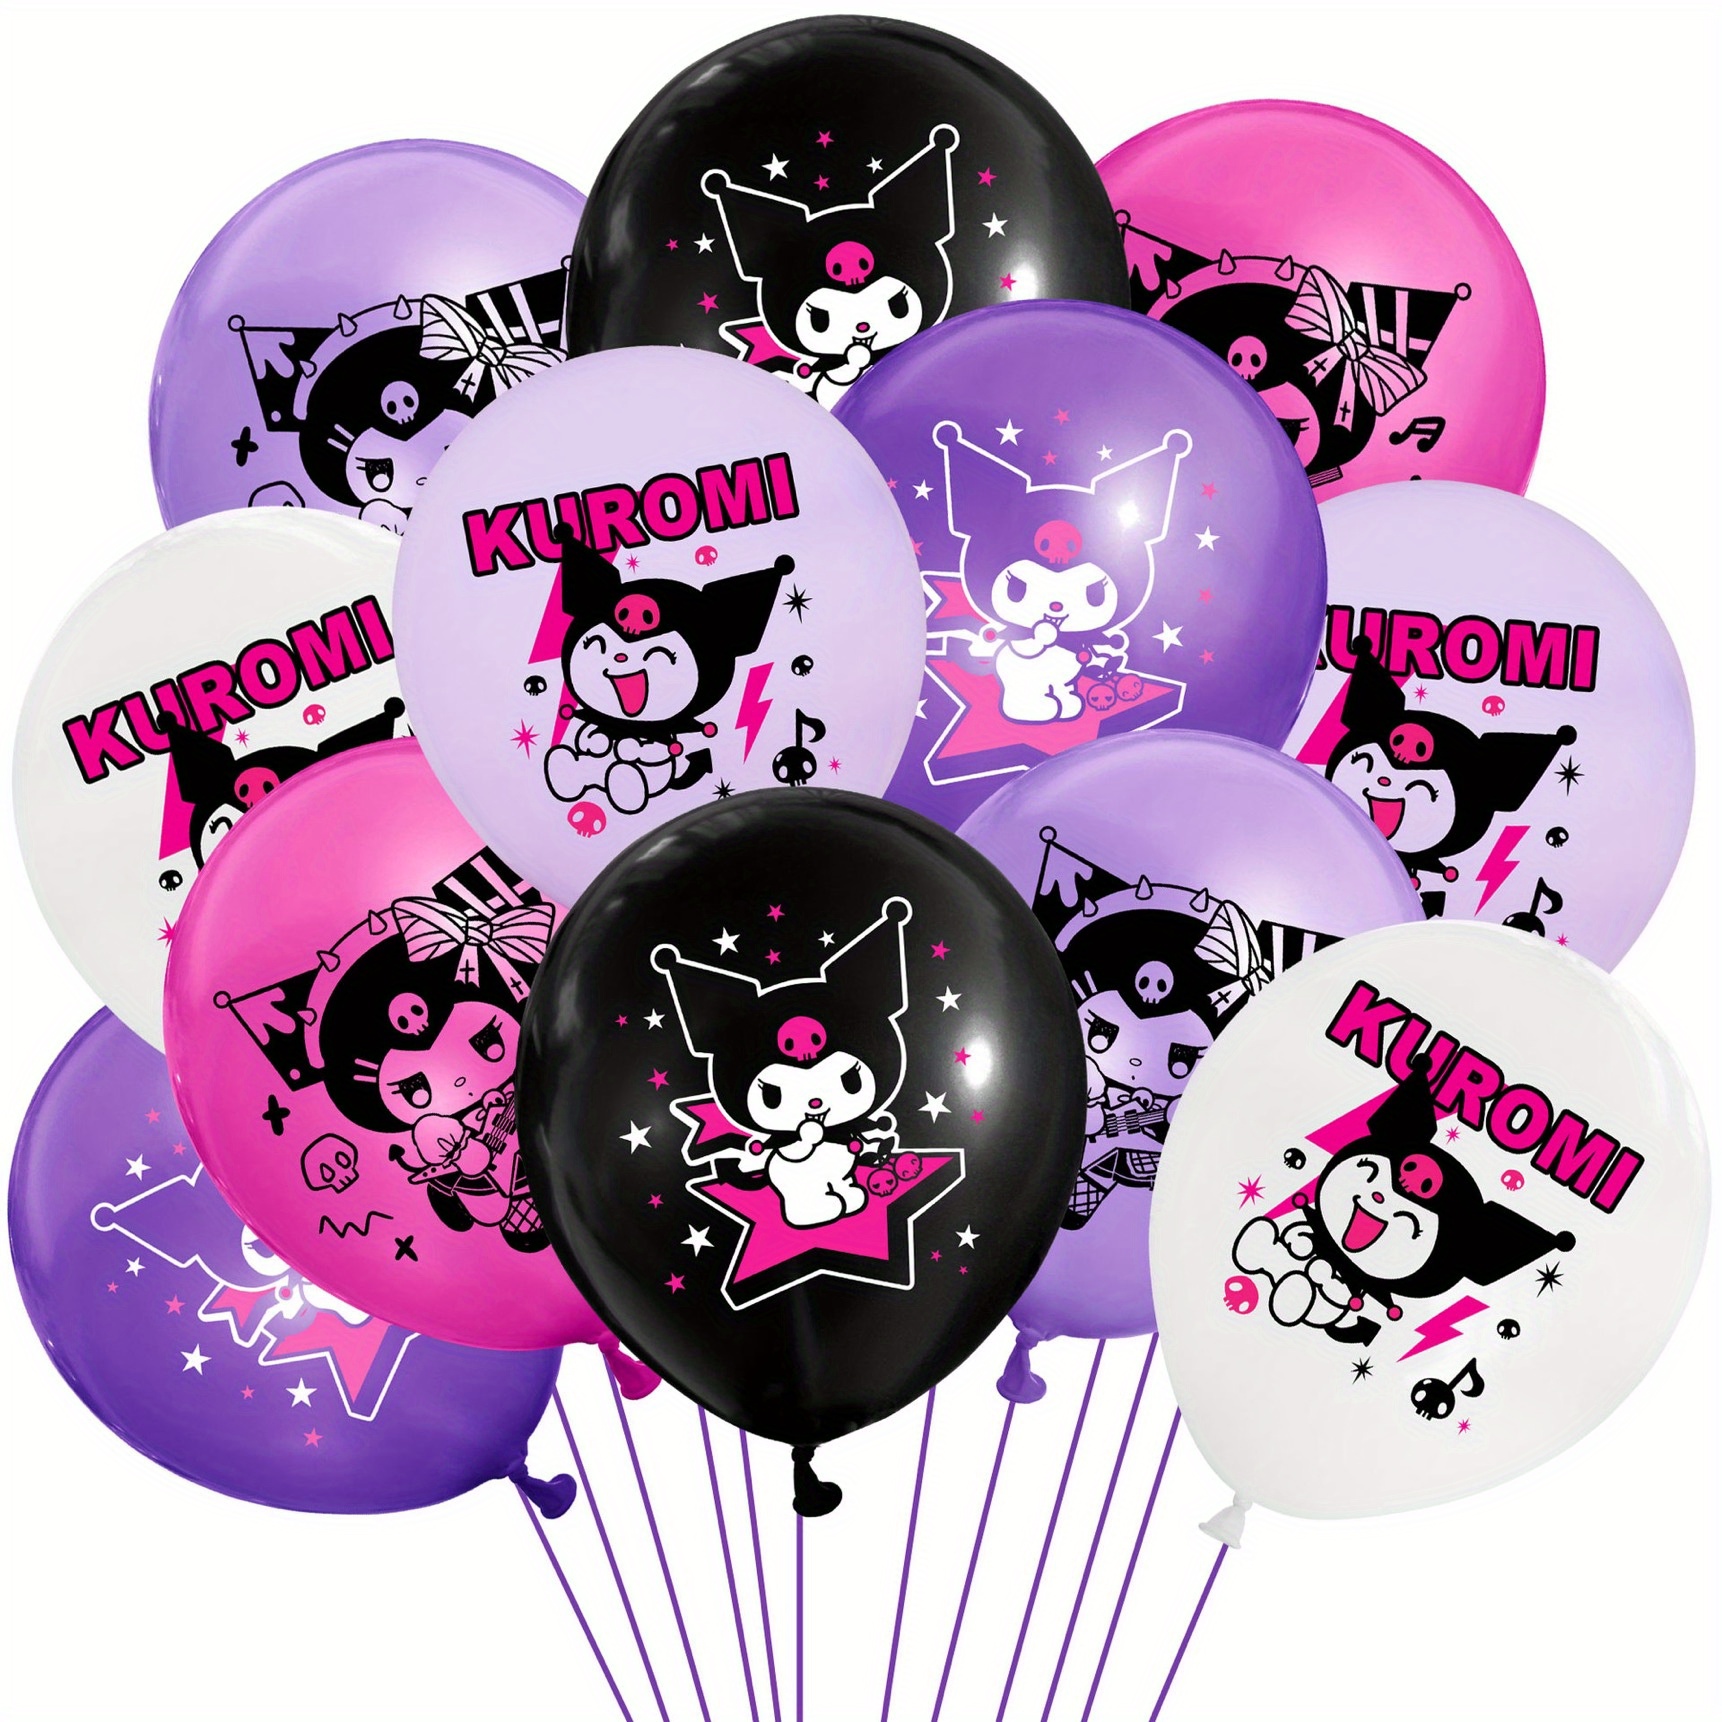 

Kuromi Balloons, Plastic Party Decoration Set With Cartoon Character Design For Birthday, Valentine's Day, And Wedding Celebrations